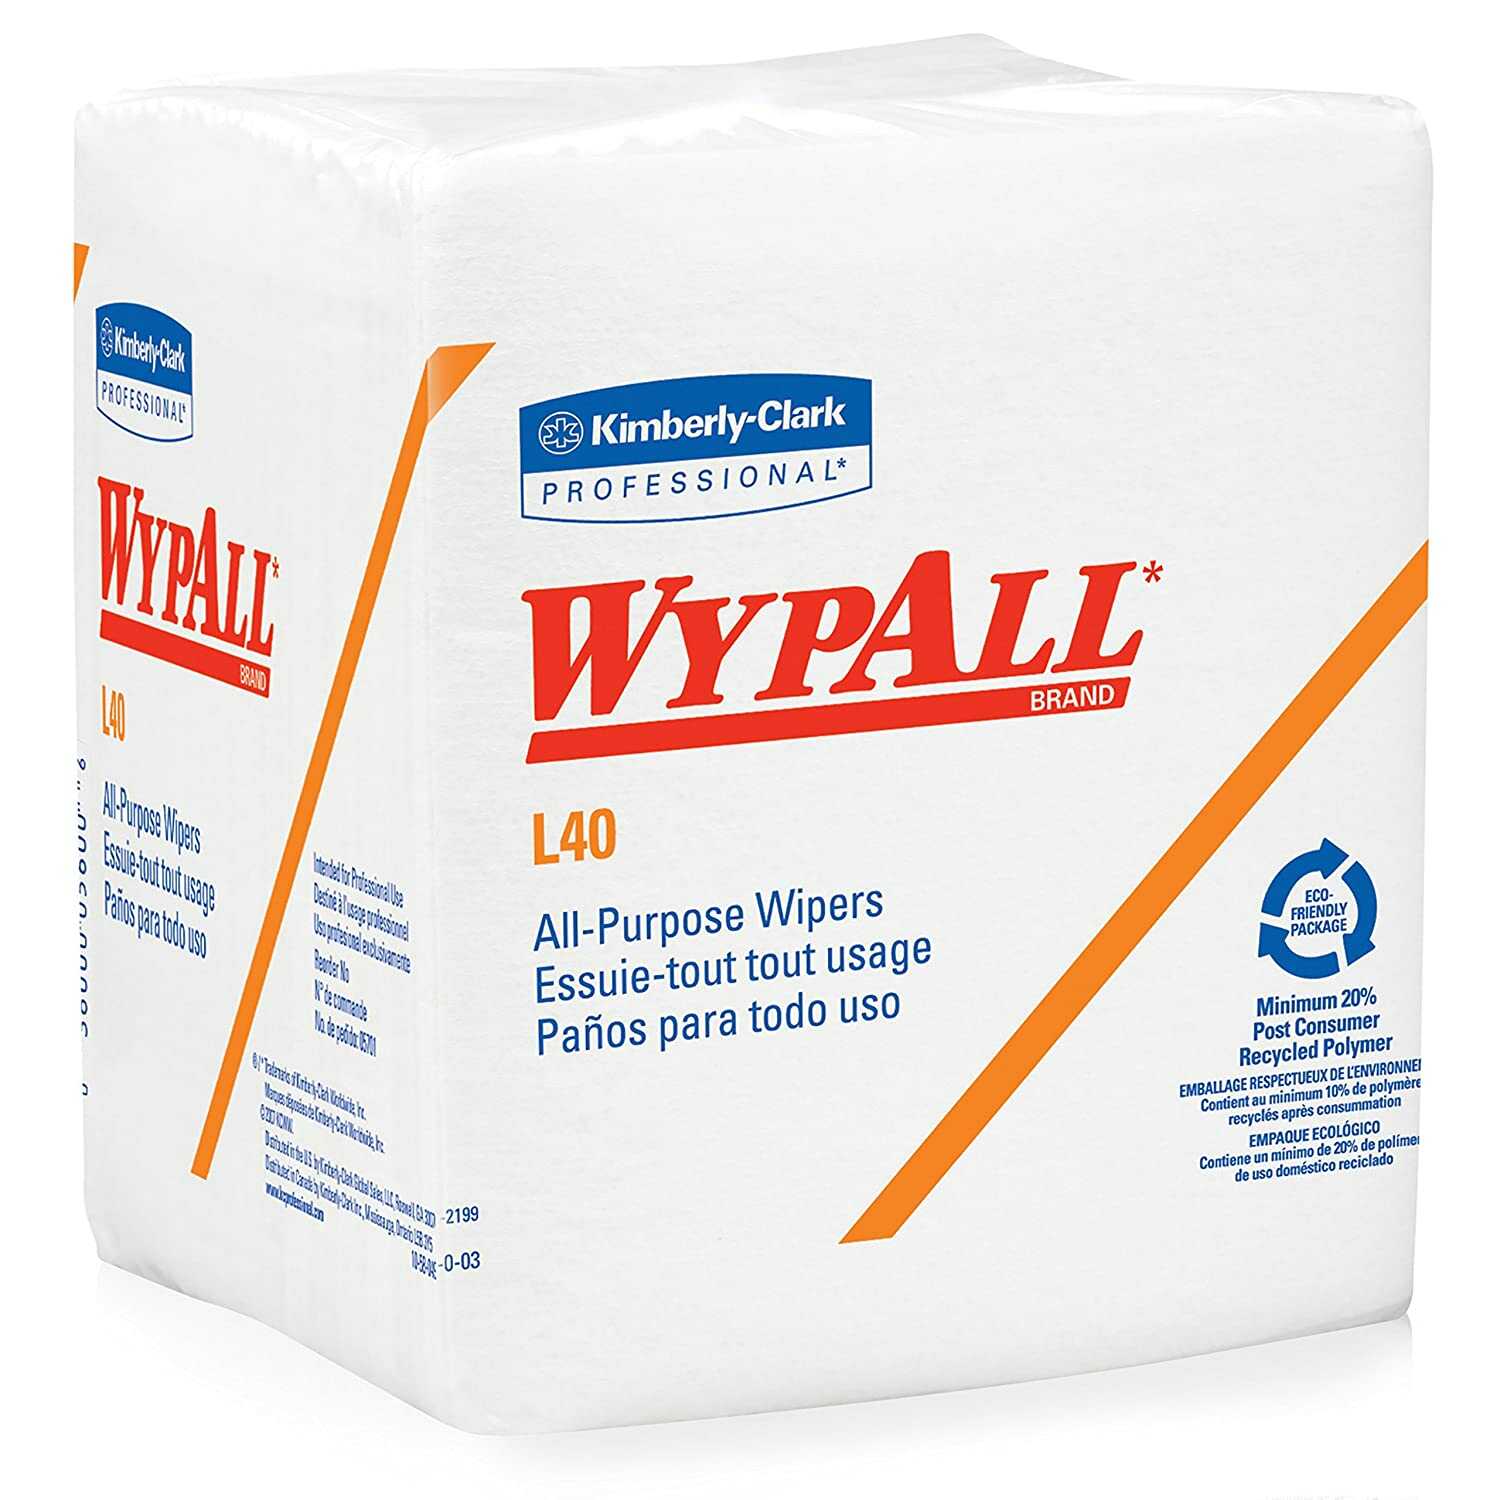 WYPALL* L40 Wipers / Quarter Fold / White / 31.7cm x 33.0, 5701 (Pack of 18)